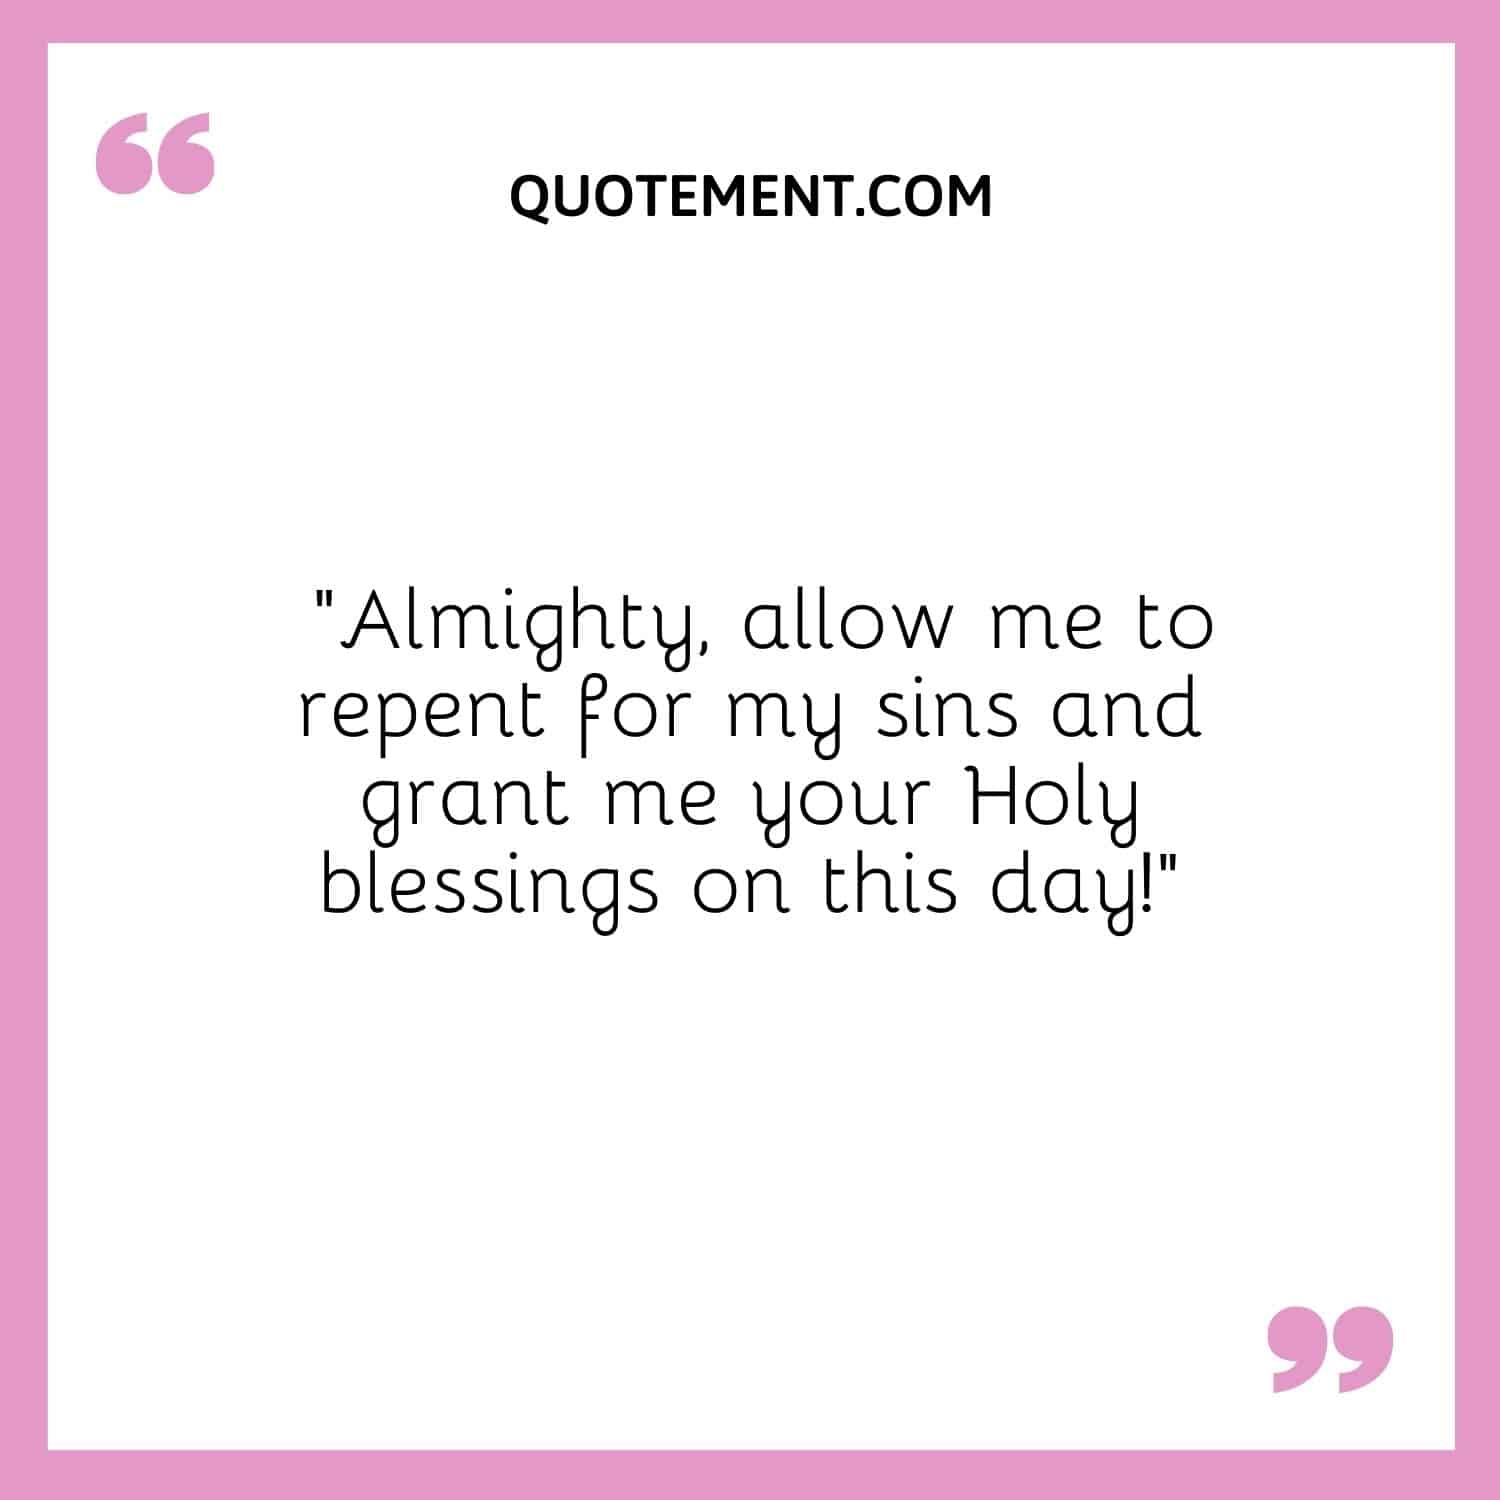 Almighty, allow me to repent for my sins and grant me your Holy blessings on this day!